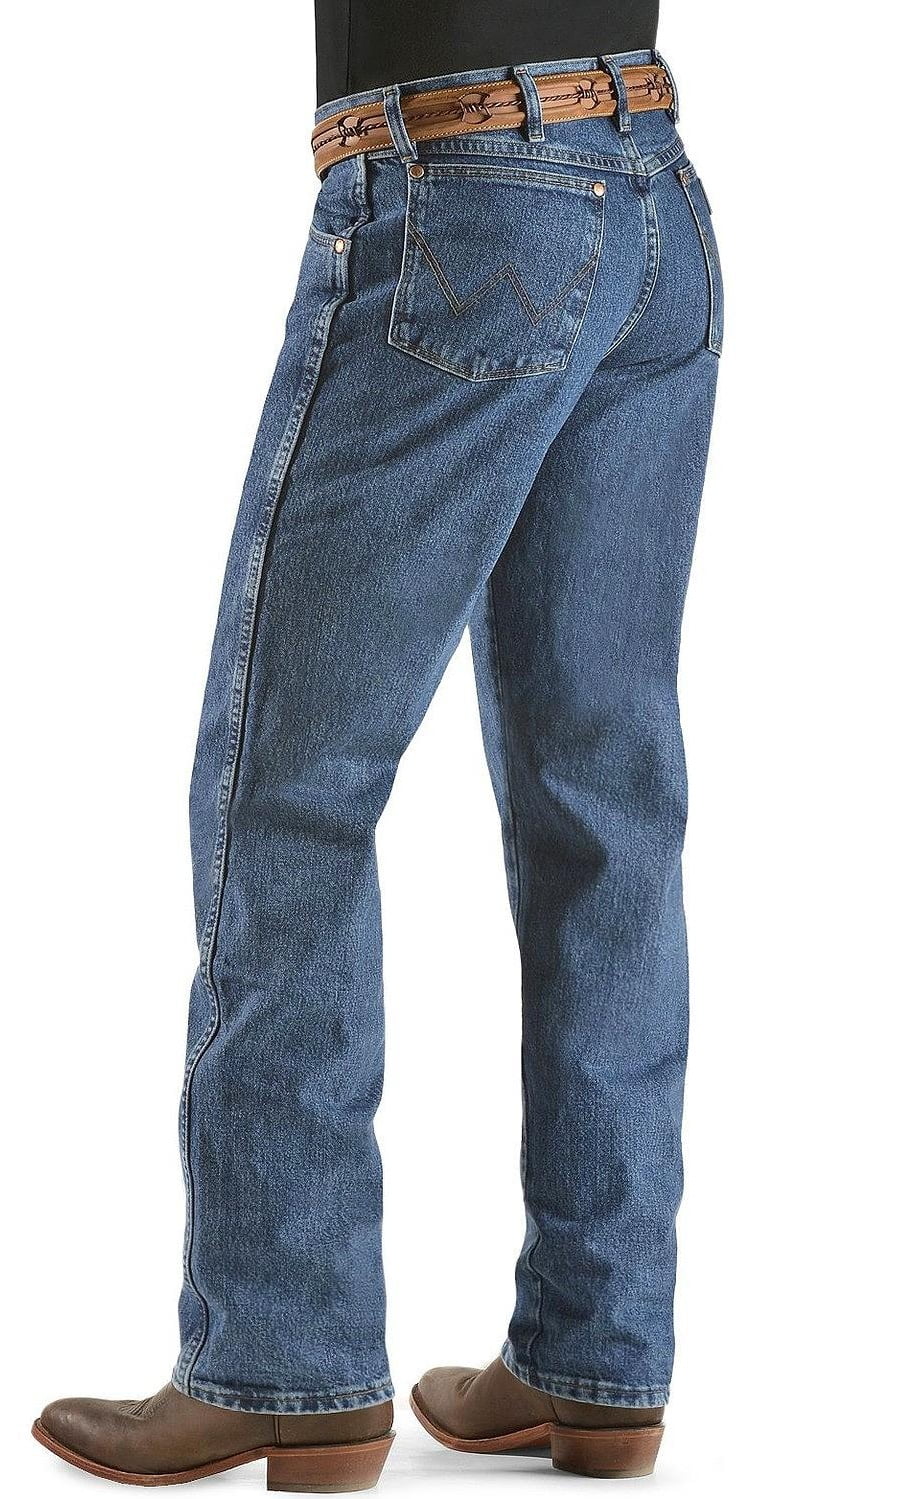 Wrangler Men's Jeans Relaxed fit premium wash - 31mwzrs 